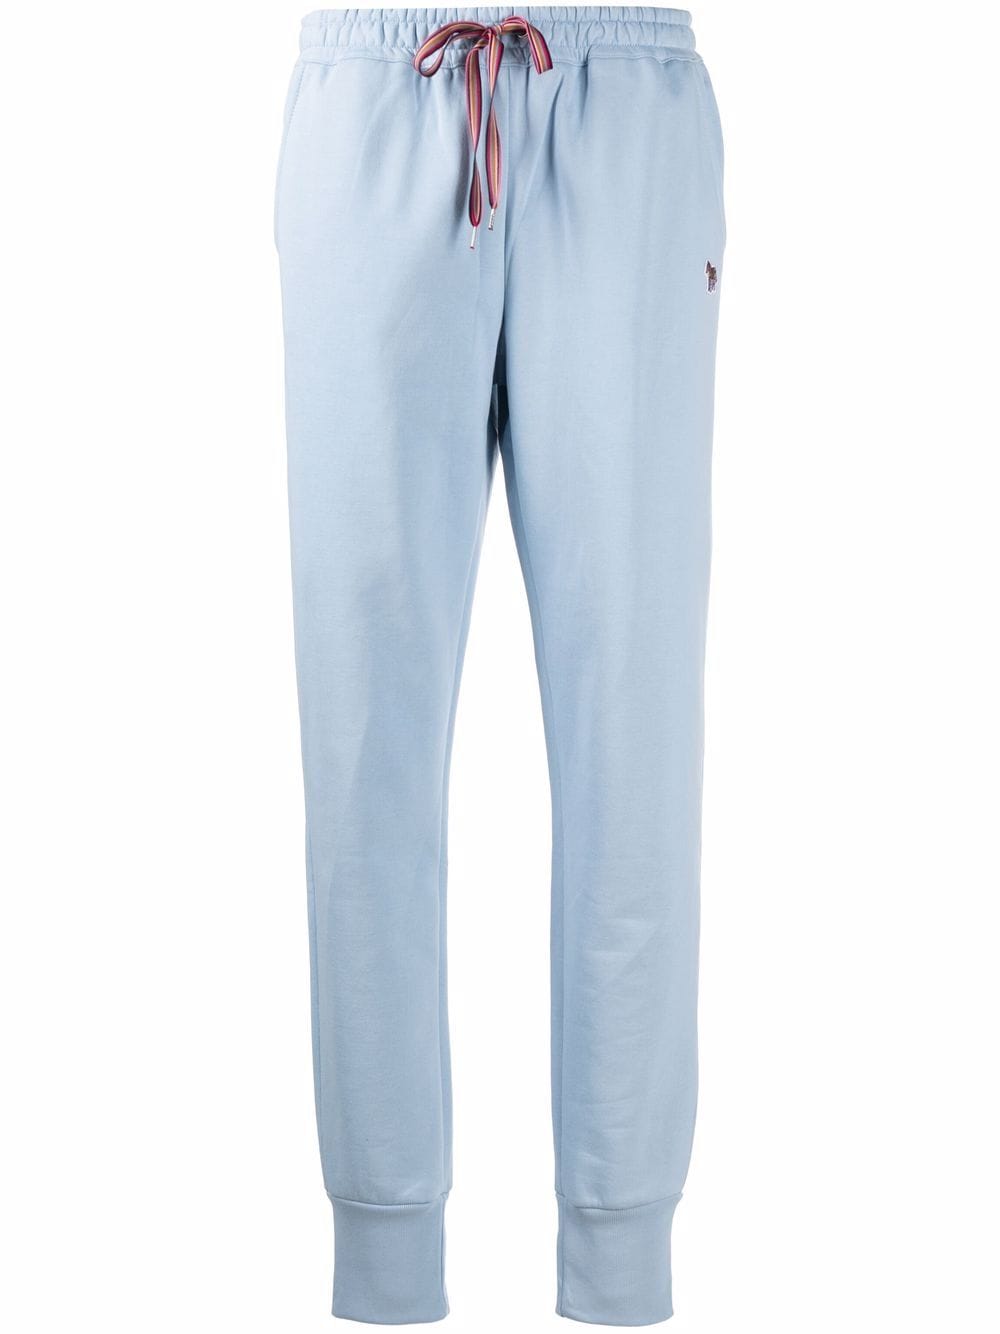 PS Paul Smith drawstring track pants - Blue von PS Paul Smith